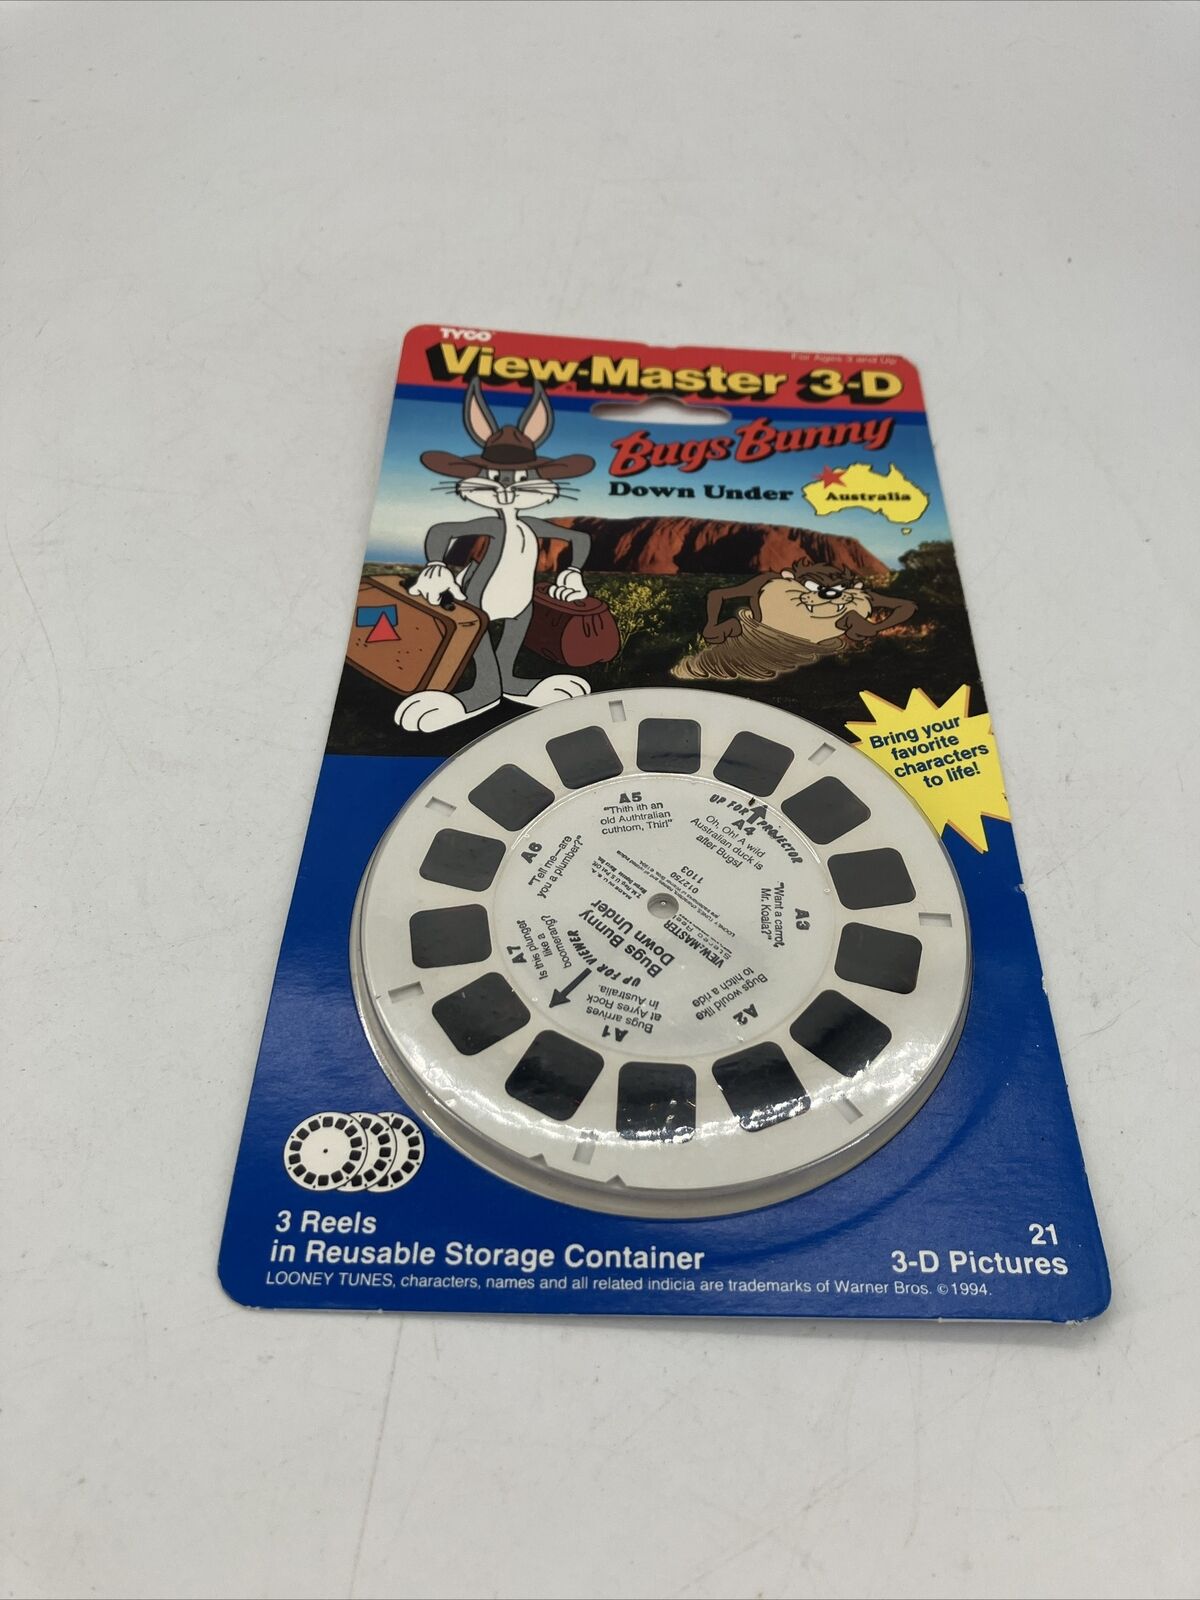 Sealed Looney Tunes Bugs Bunny Aussie Down Under Cartoons view-master Reels 1103